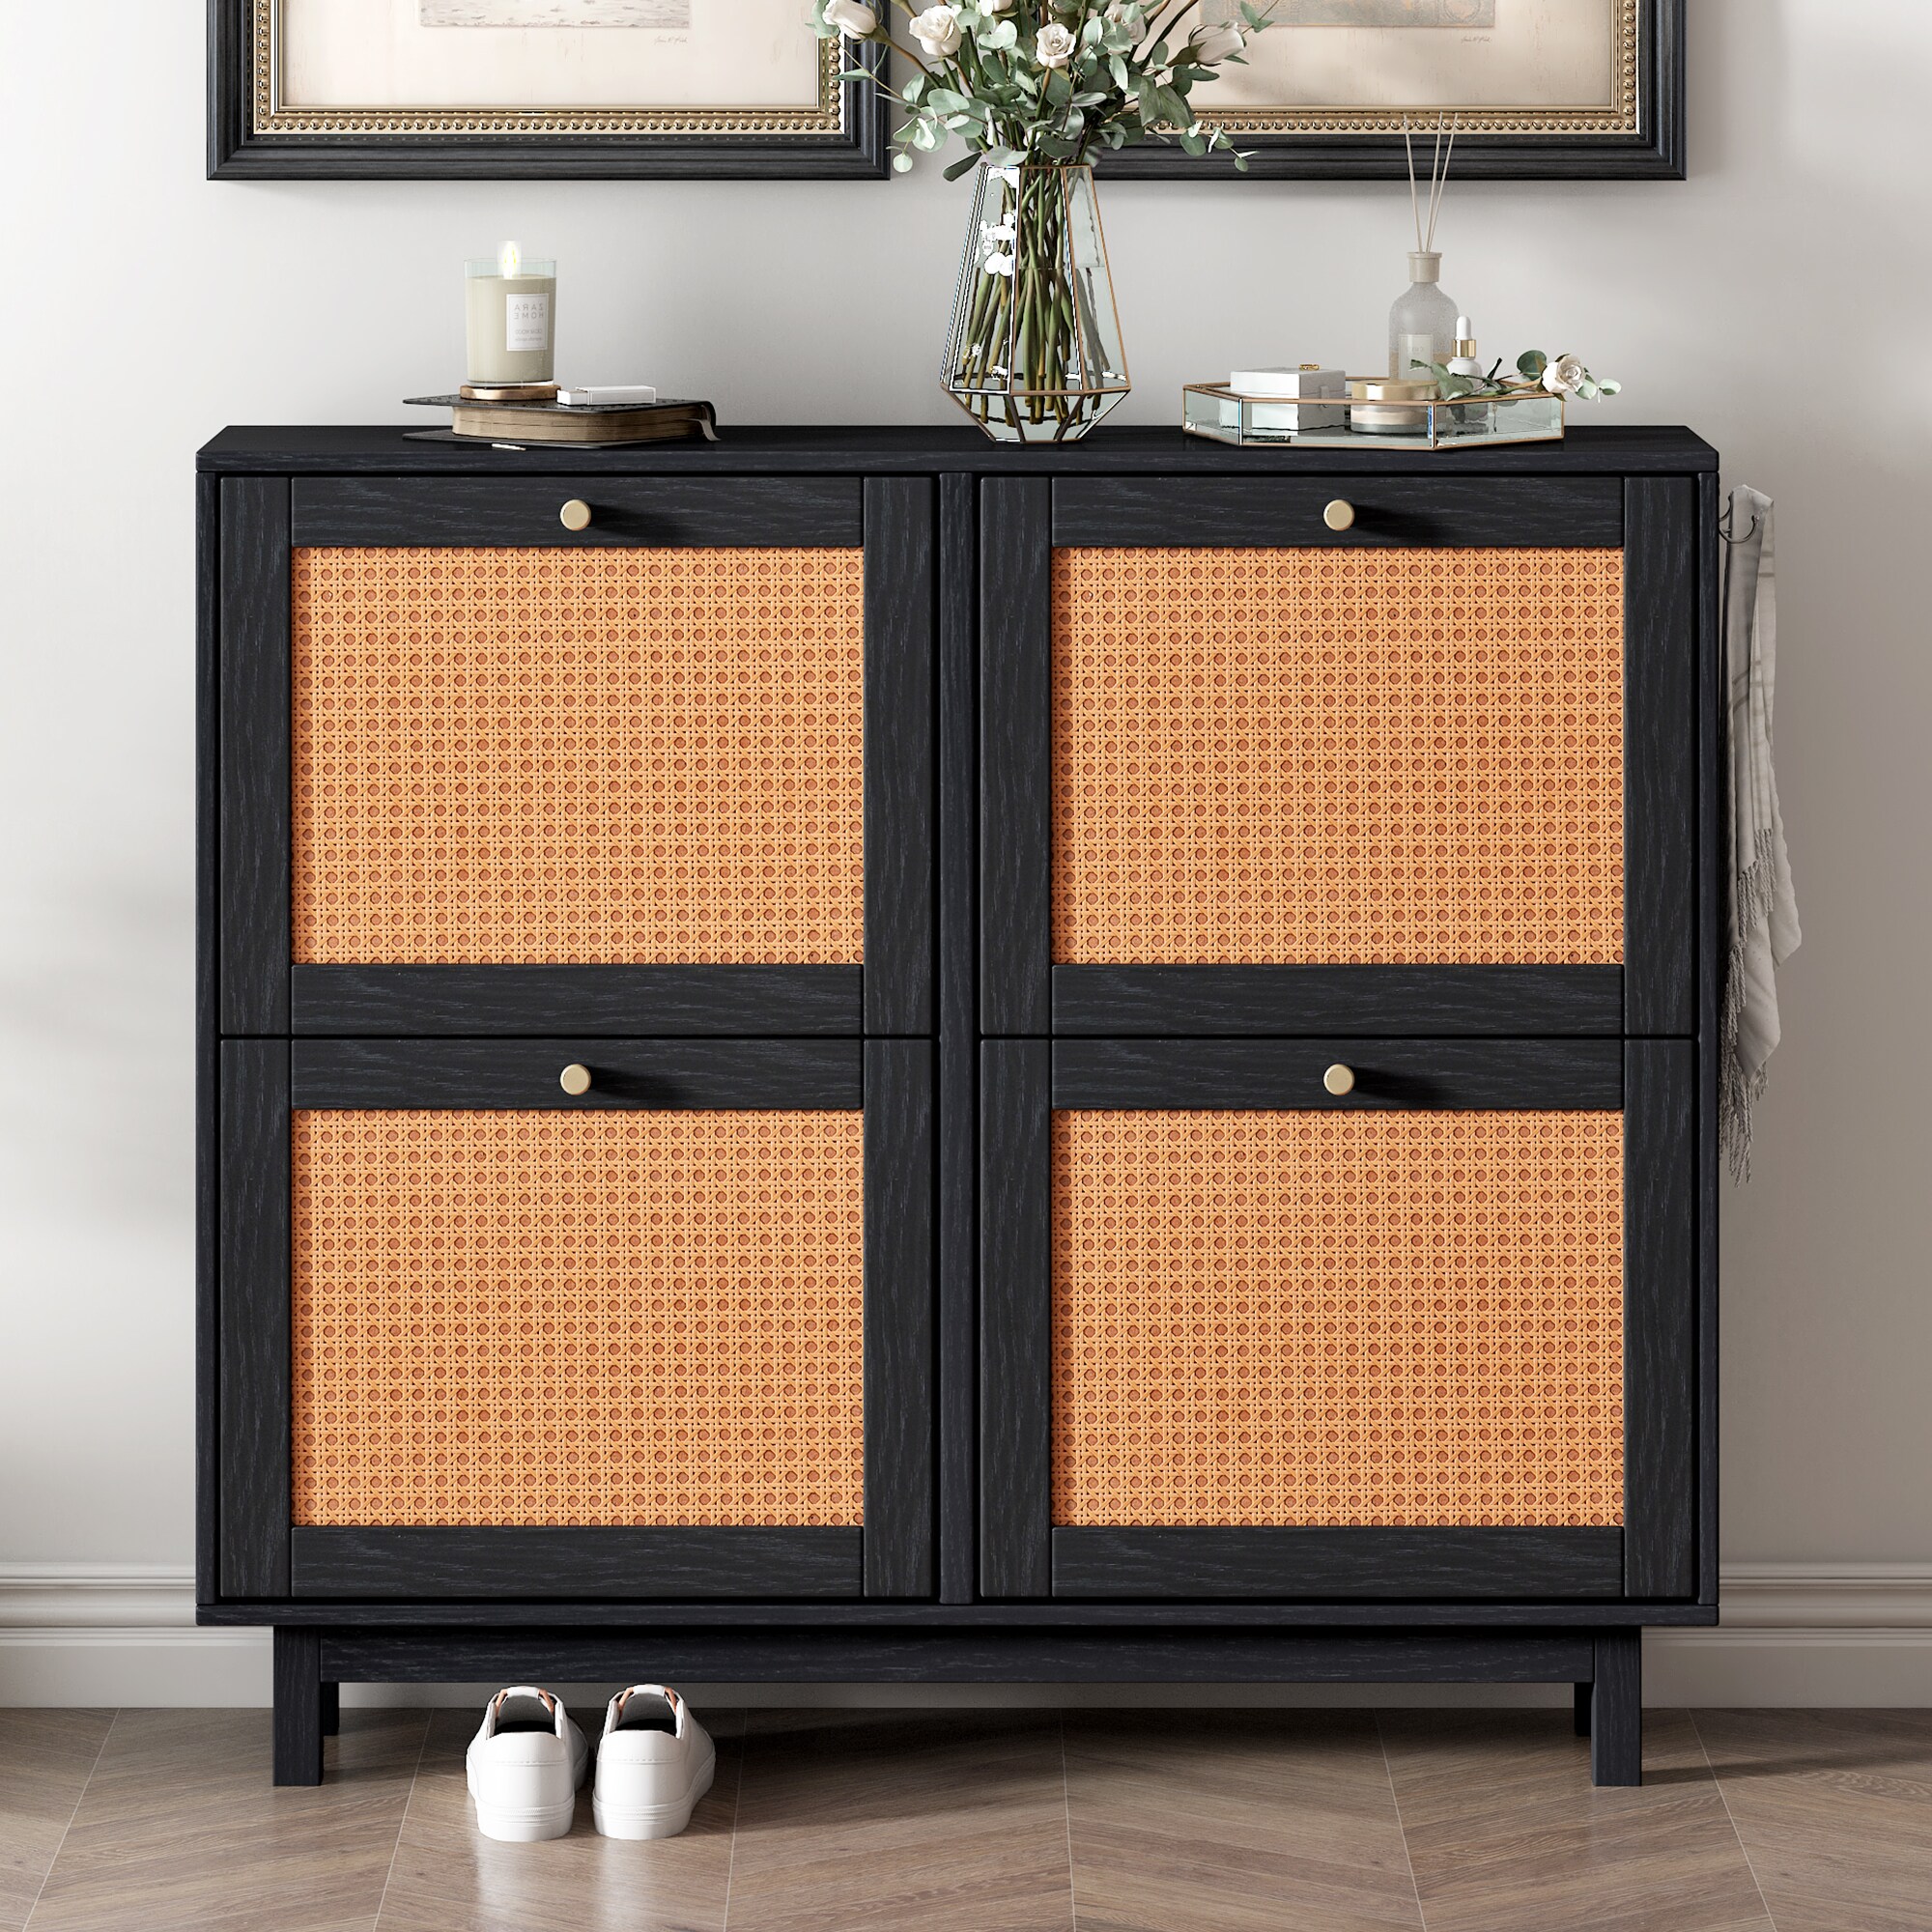 ModernLuxe Black MDF Shoe Cabinet with 3 Tiers and Hidden Flip Down Drawer  - Modern Minimalist Shoe Storage for 20 Pairs in the Shoe Storage  department at